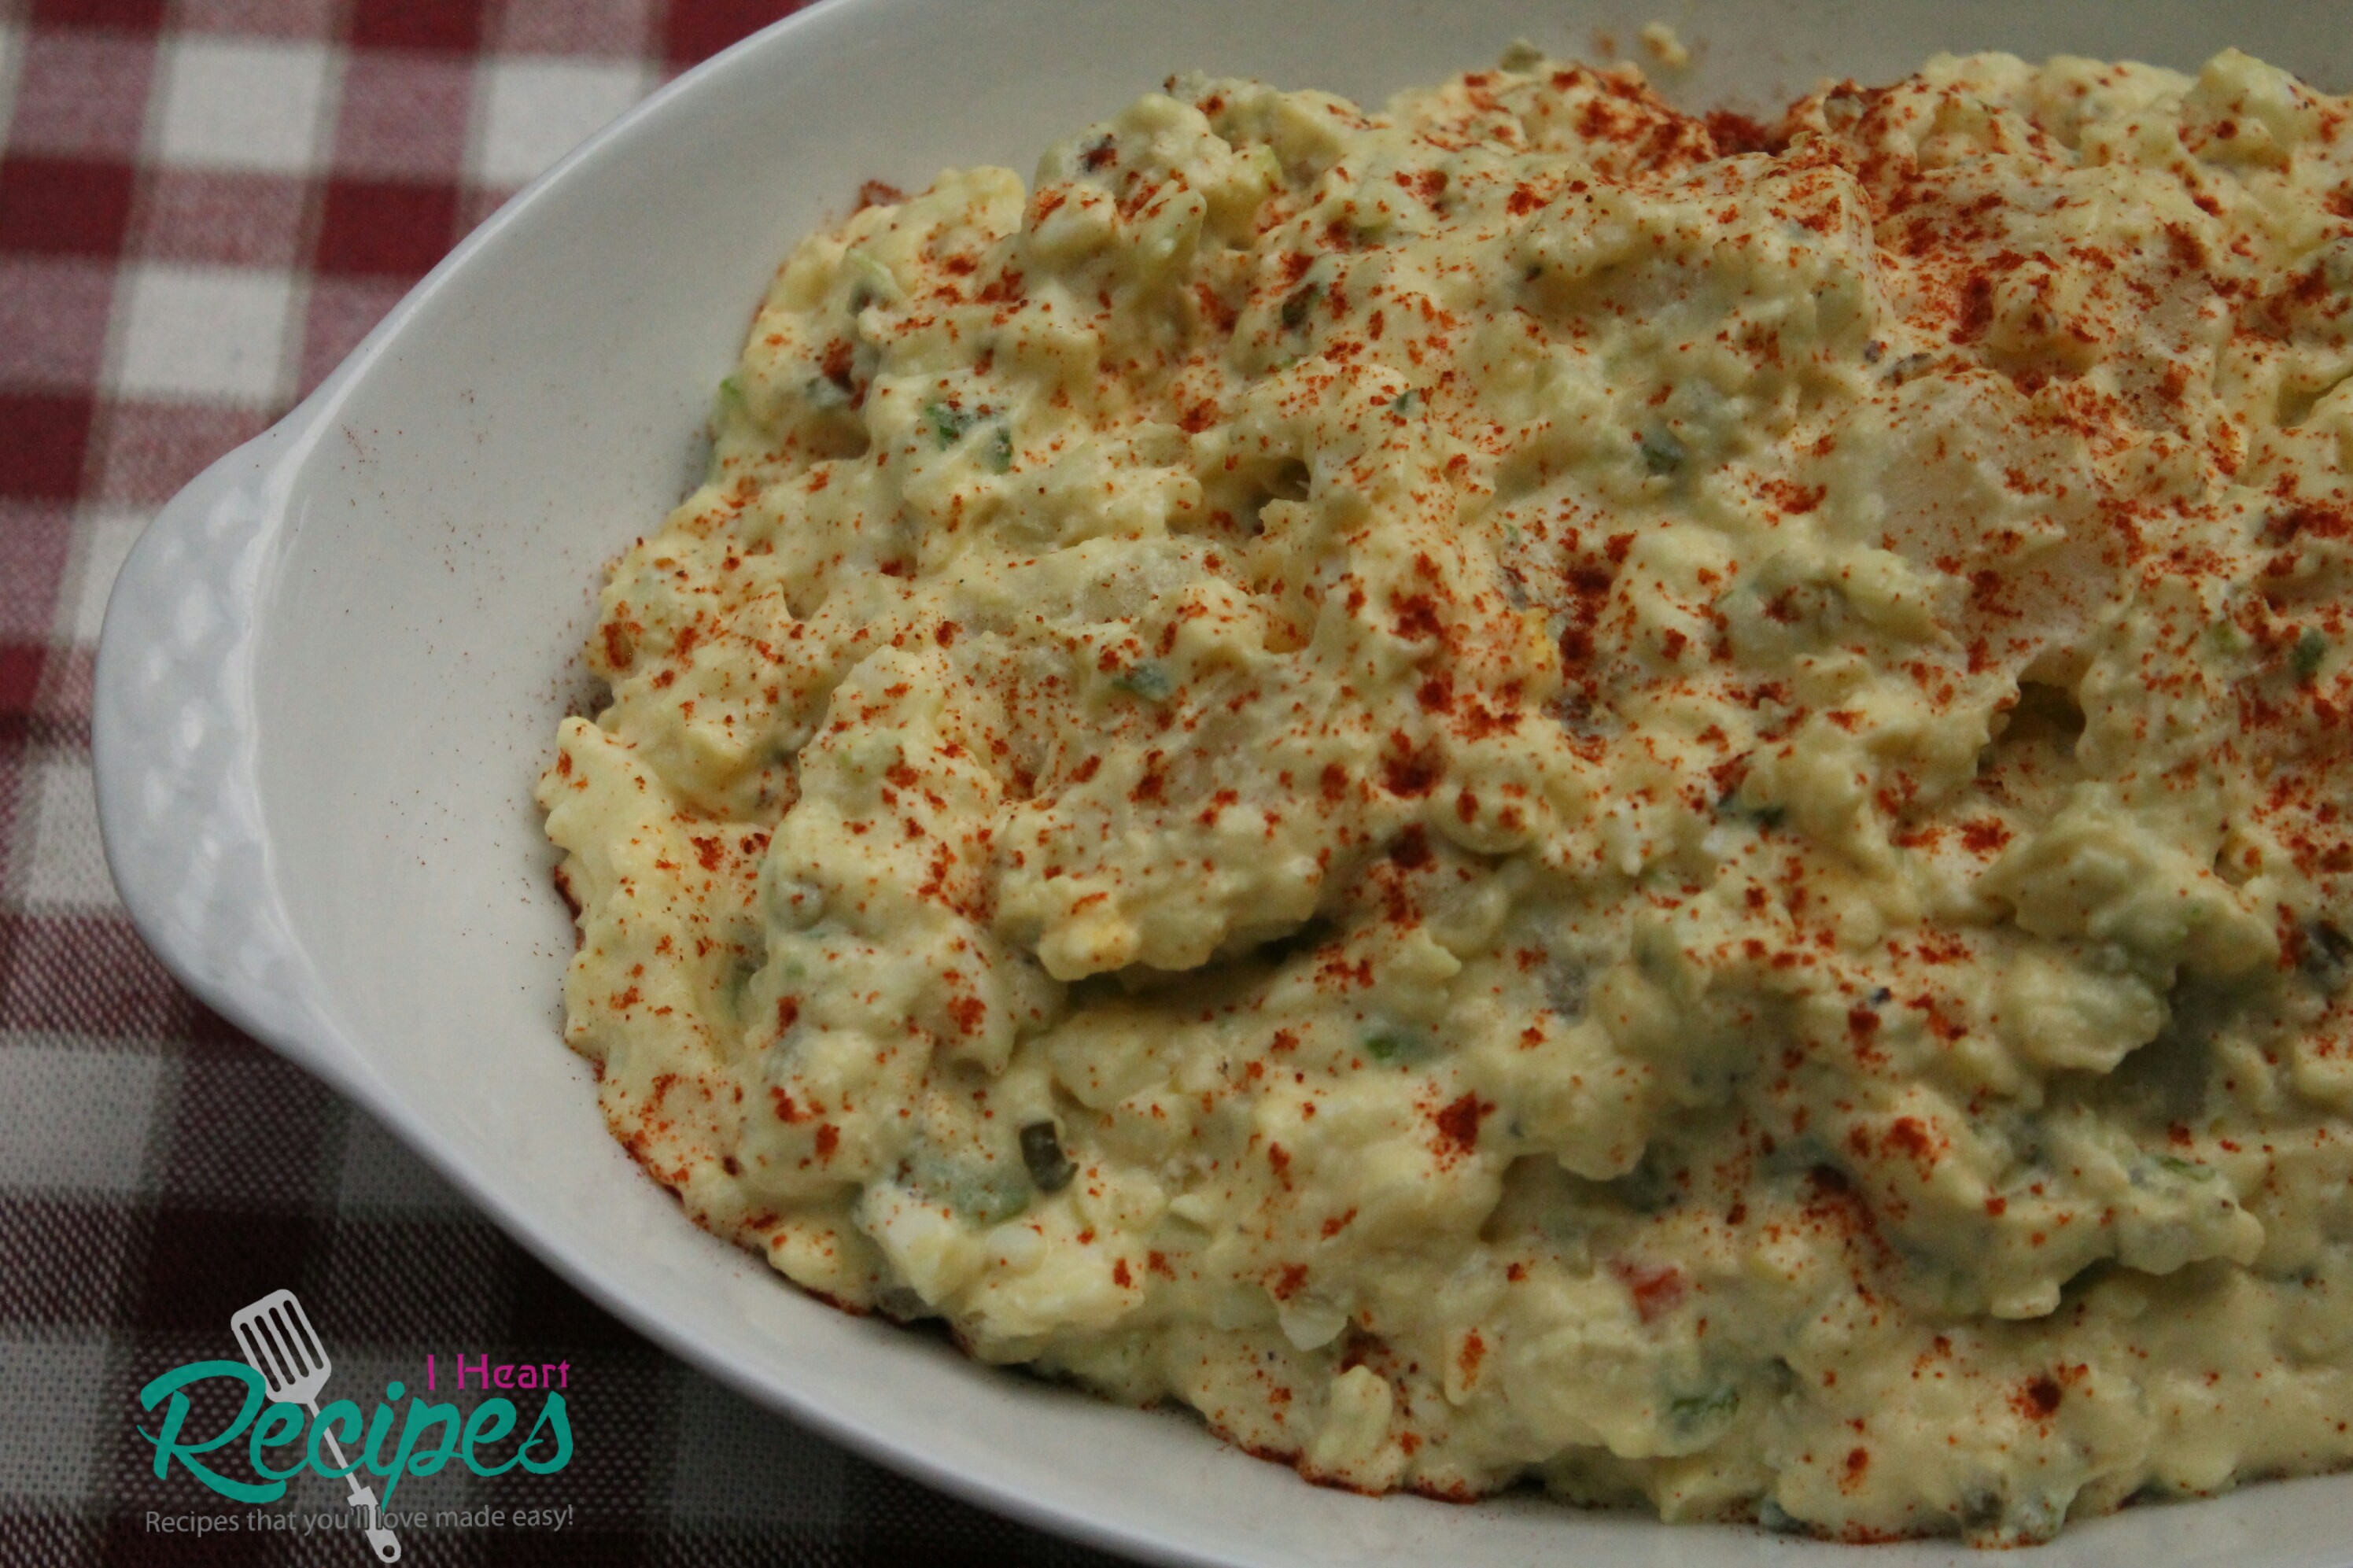 A round, white casserole dish filled with creamy Southern potato salad. The potato salad dressing is a light yellow color, mixed with chunky potatoes and vegetables and sprinkled with paprika.